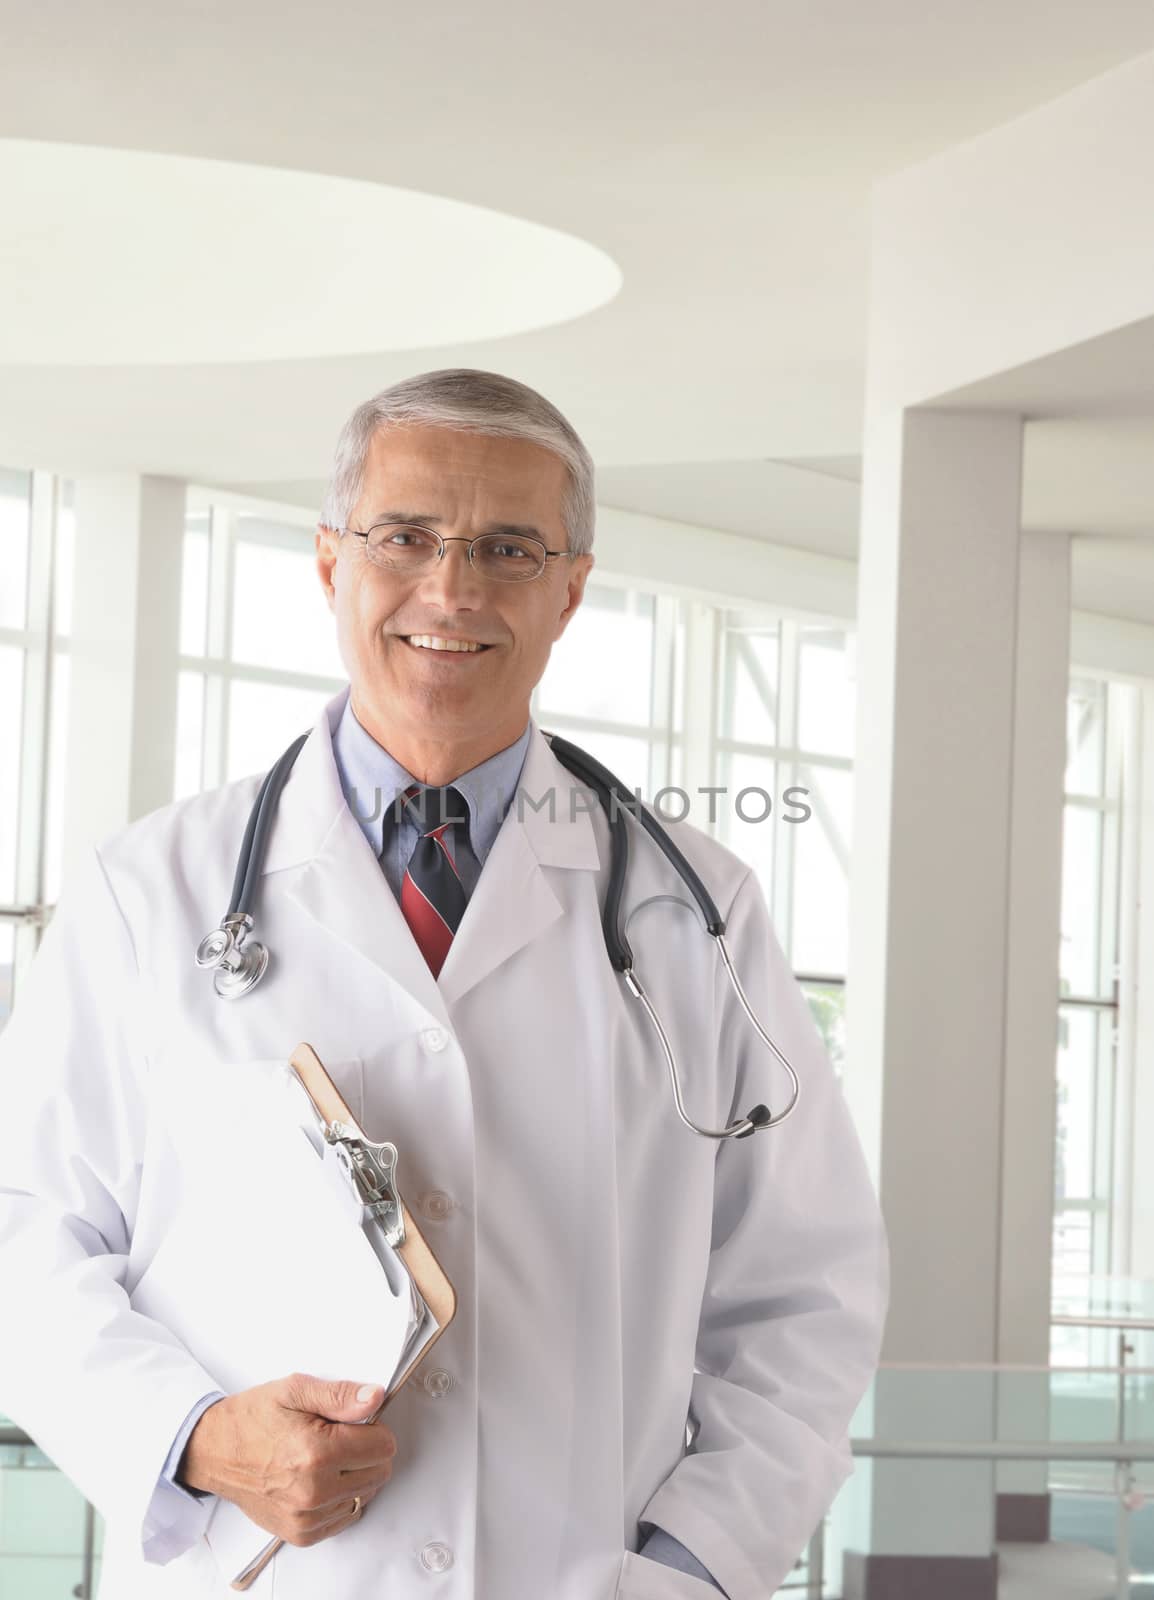 Middle aged doctor wearing lab coat holding a Clip Board in modern medical facility